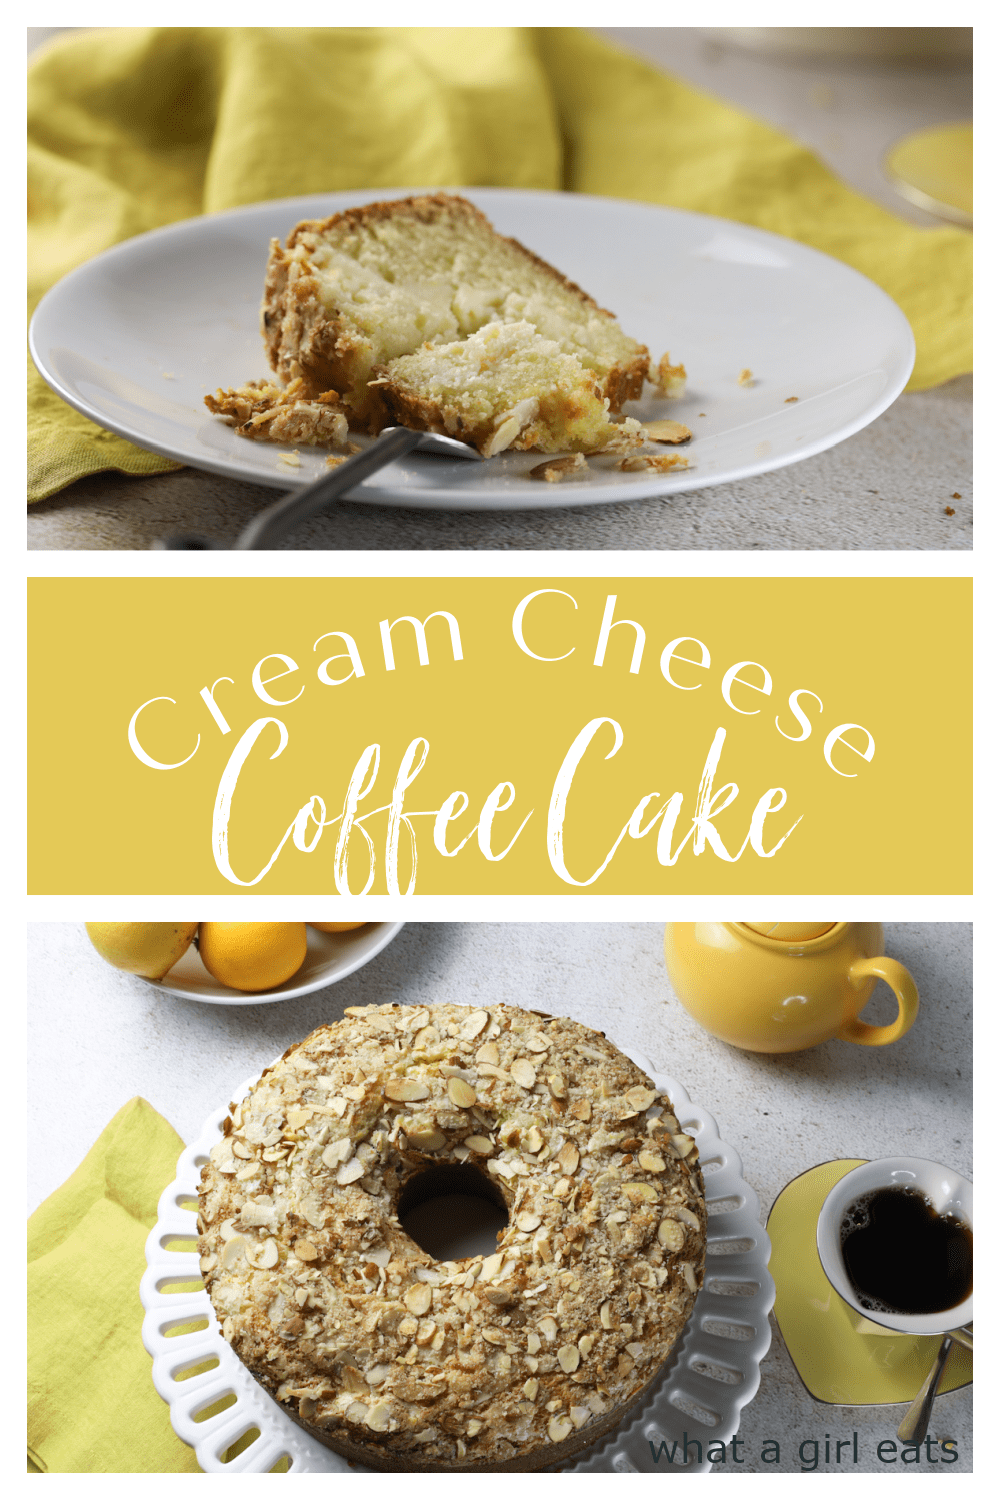 Cream cheese coffee cake is tender and moist with a rich cream cheese filling and lemon and almond topping.